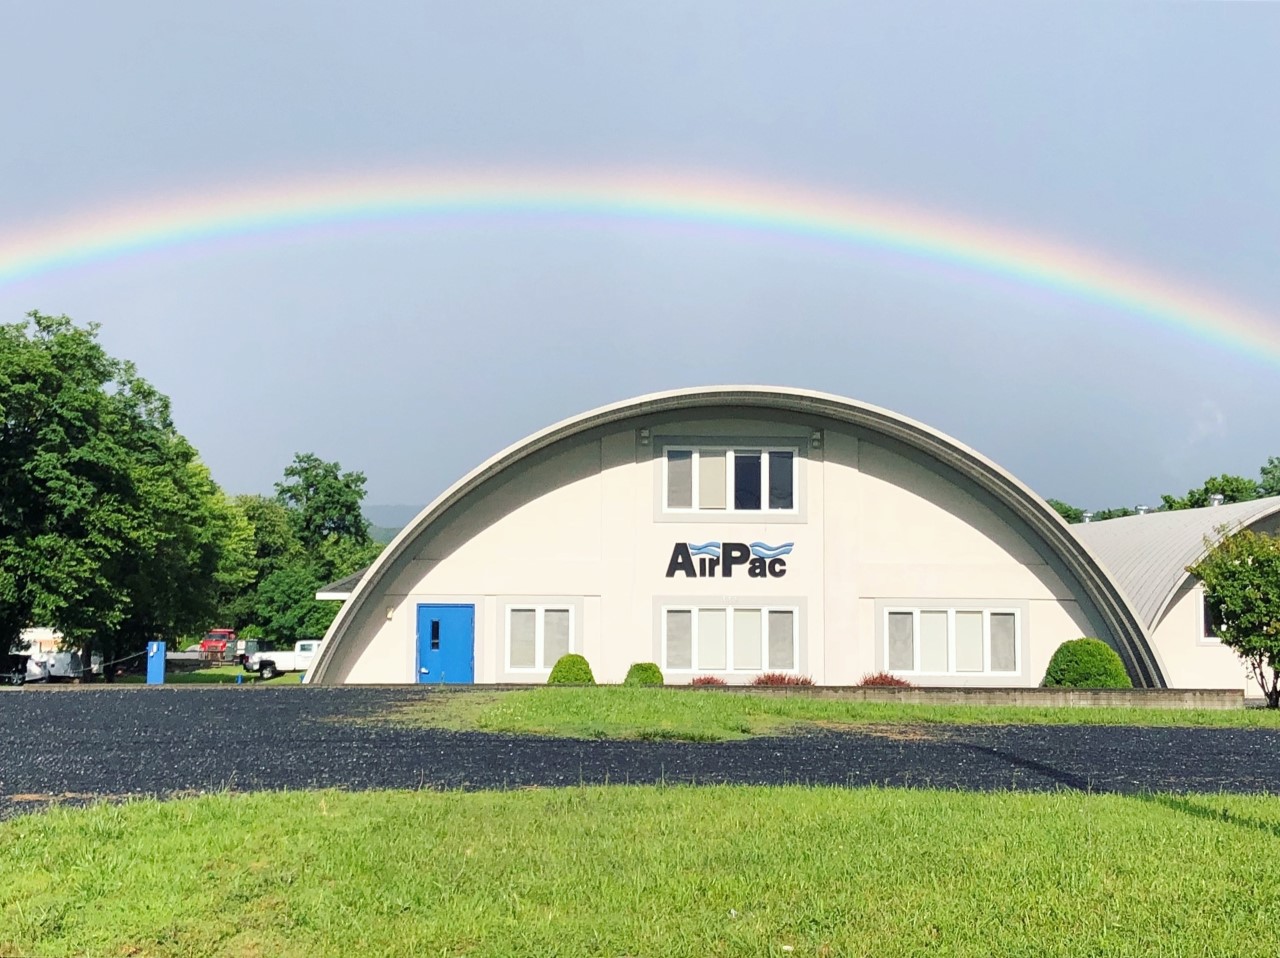 AirPac office with rainbow